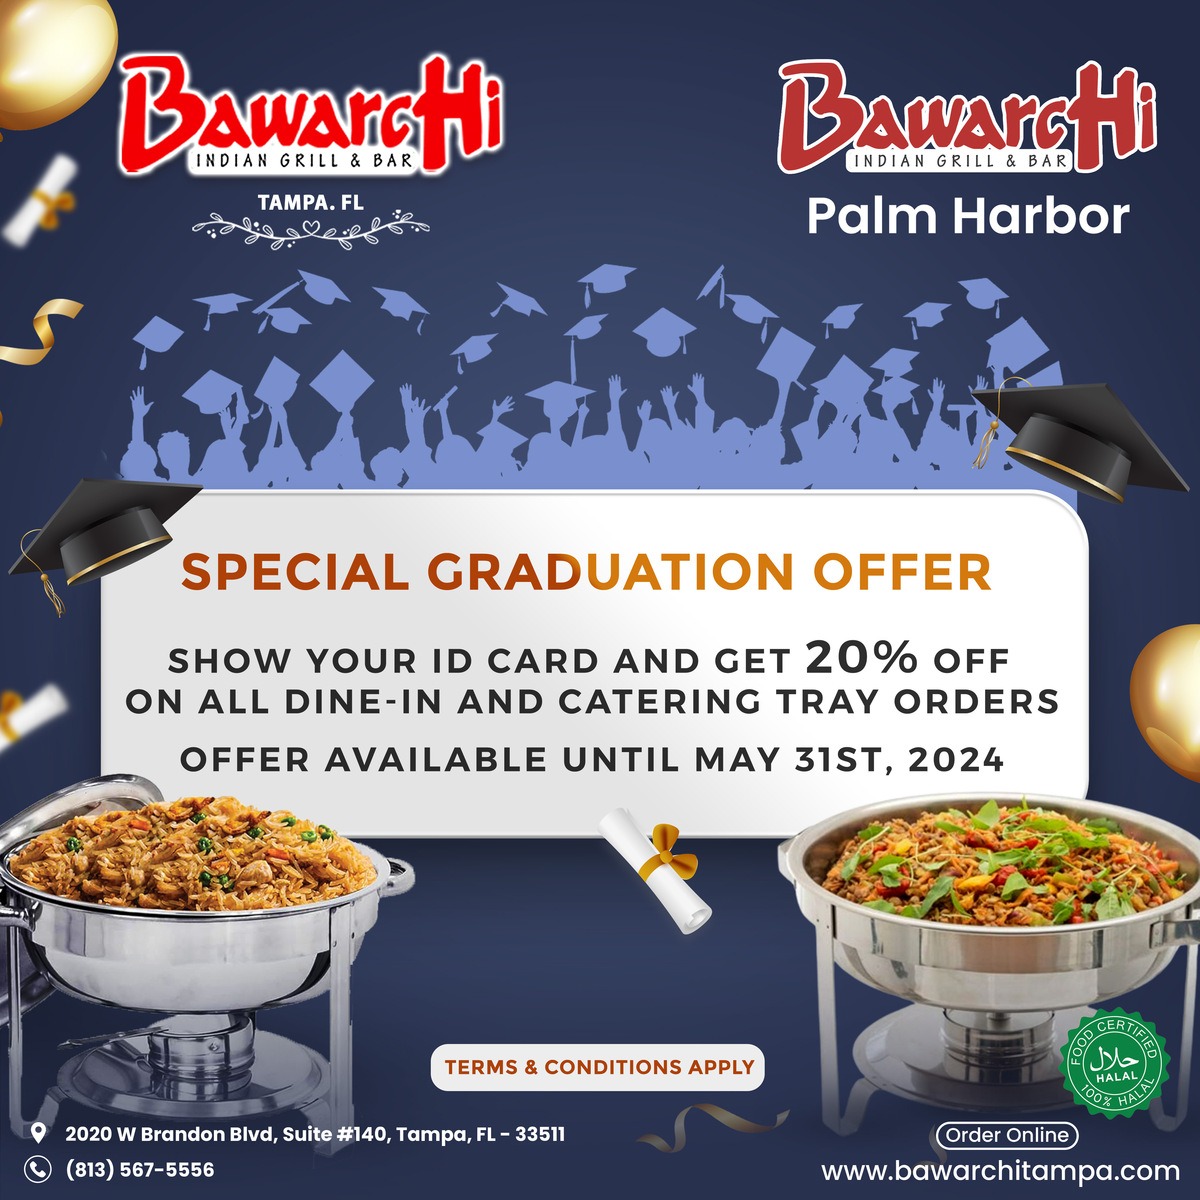 SPECIAL GRADUATION OFFER! Show your ID card and enjoy a fantastic 20% OFF on all dine-in and catering tray orders! Hurry, offer valid until May 31st, 2024.